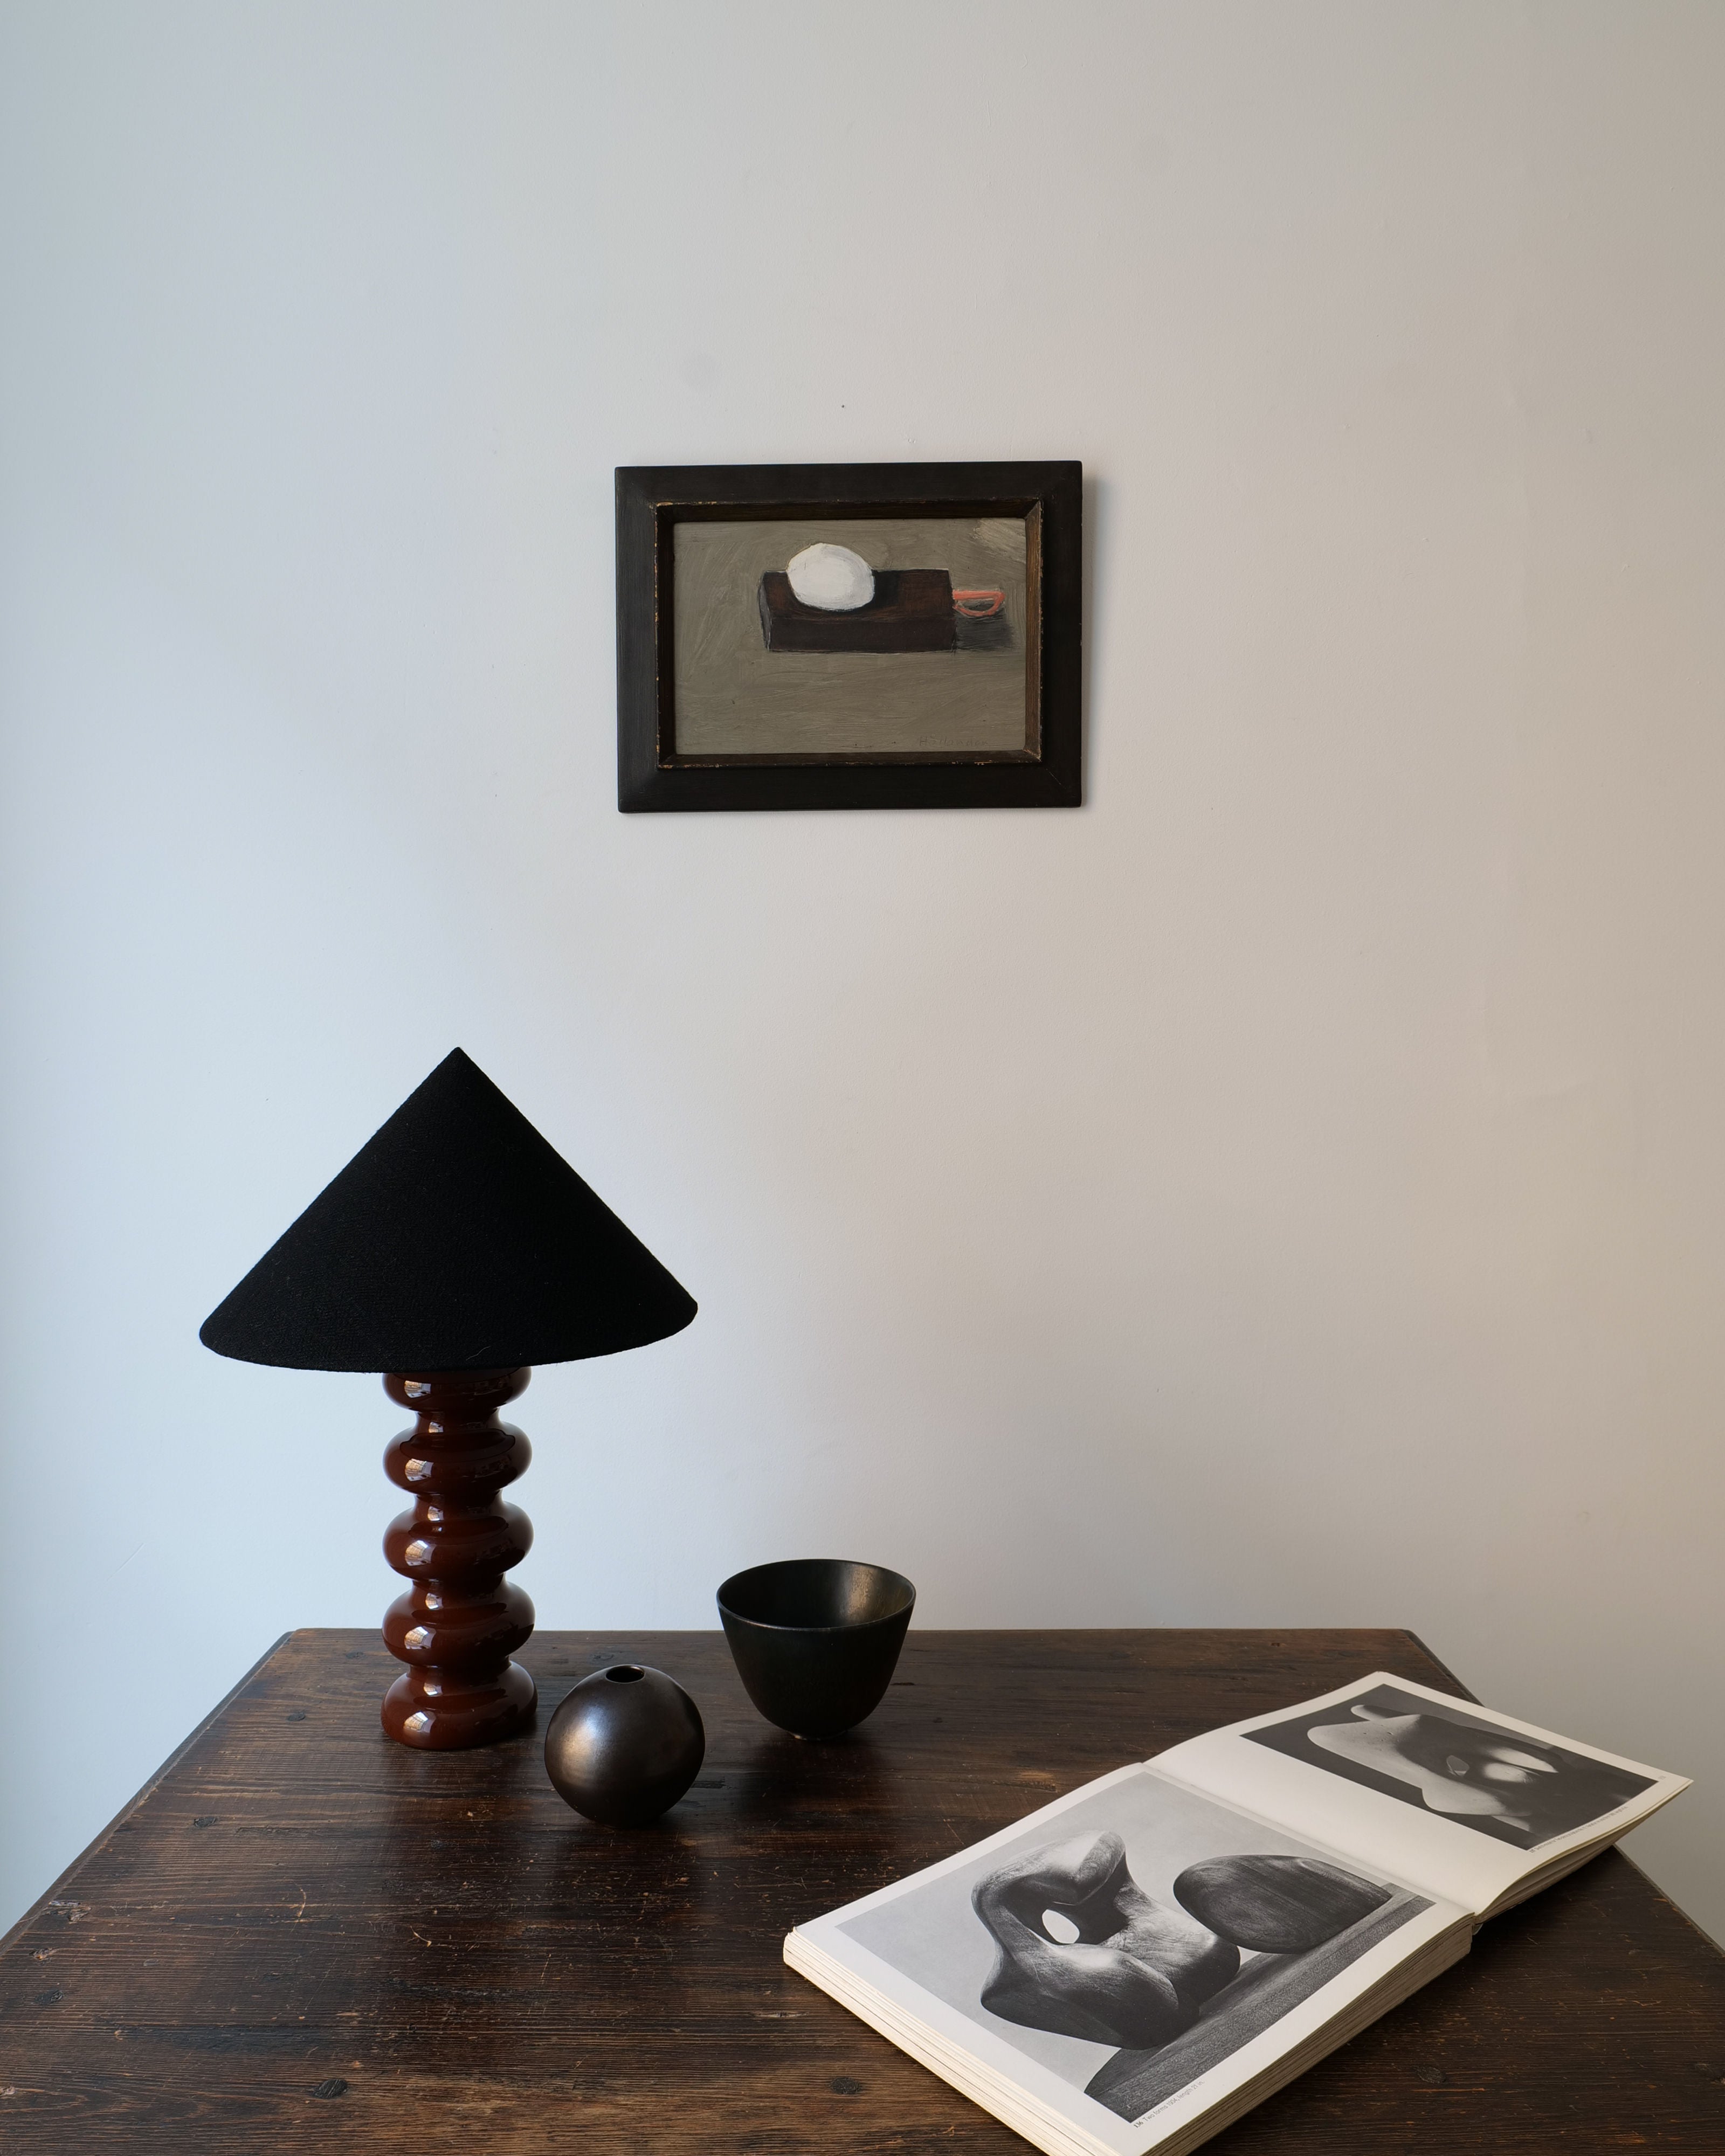 A minimalist interior setup with a wooden table displaying a Collection apart Sculptural Ceramic Lamp, two dark spherical objects, and an open book with black and white photographs. A framed painting hangs on the pale wall above.